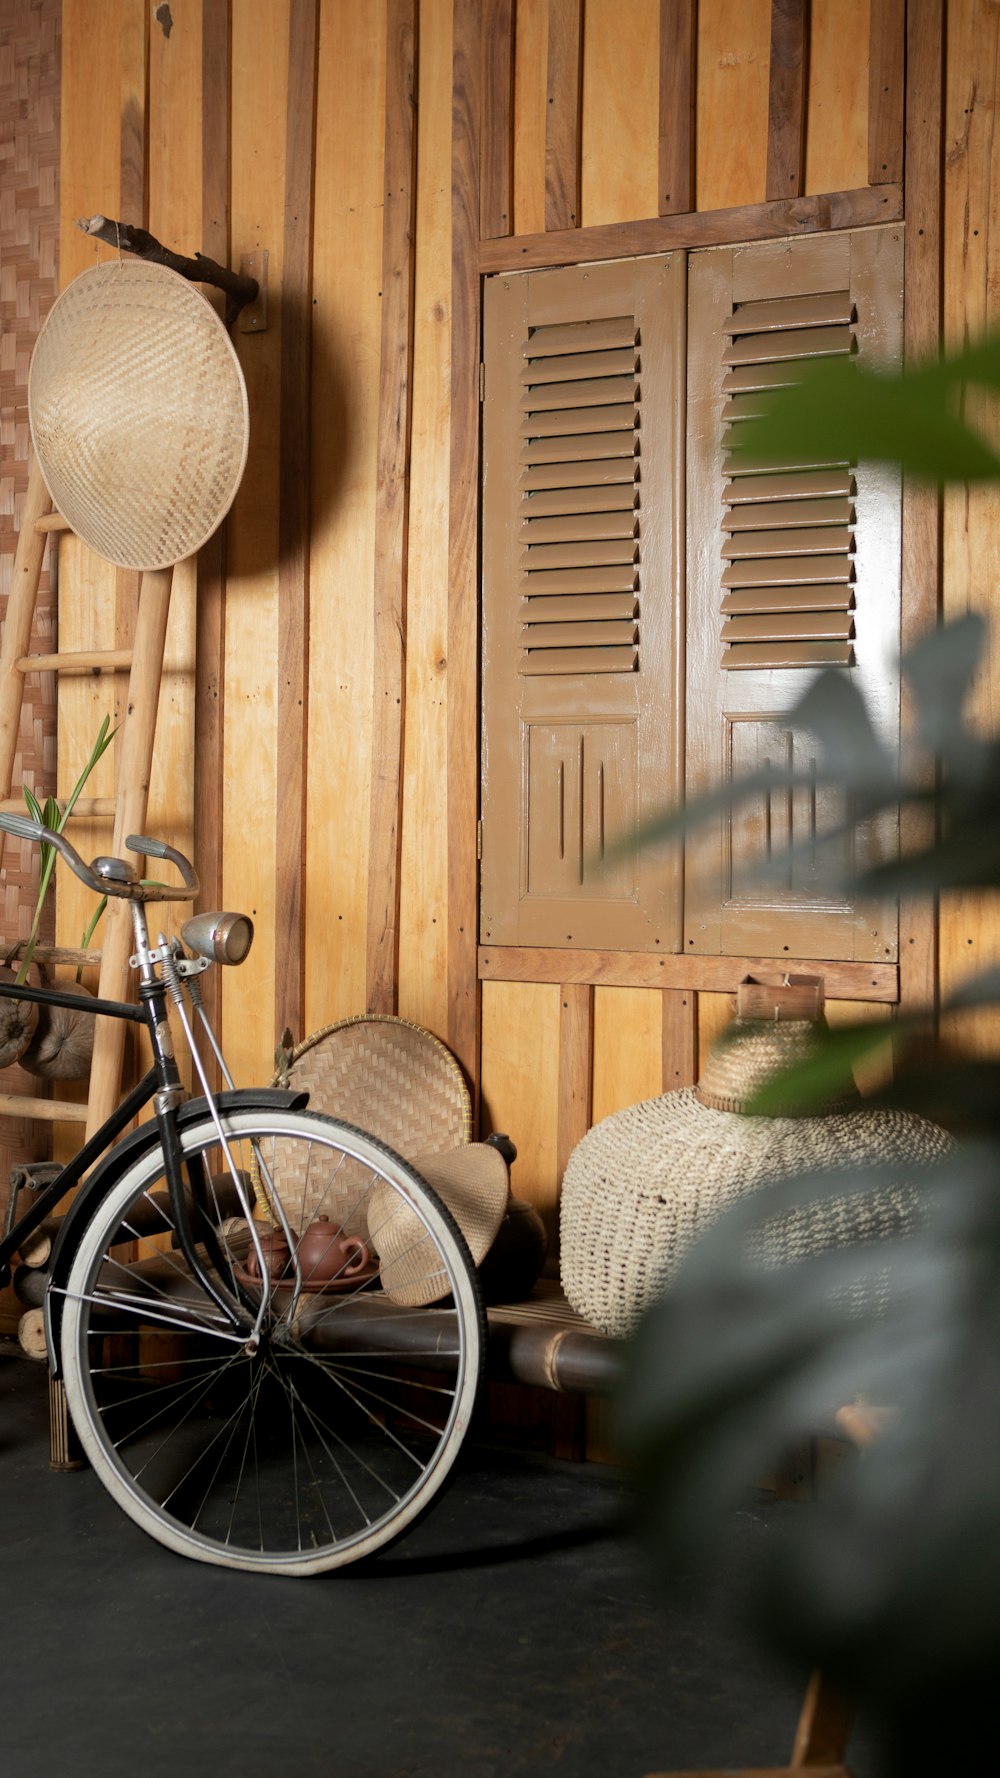 a bicycle parked in a room with wooden walls